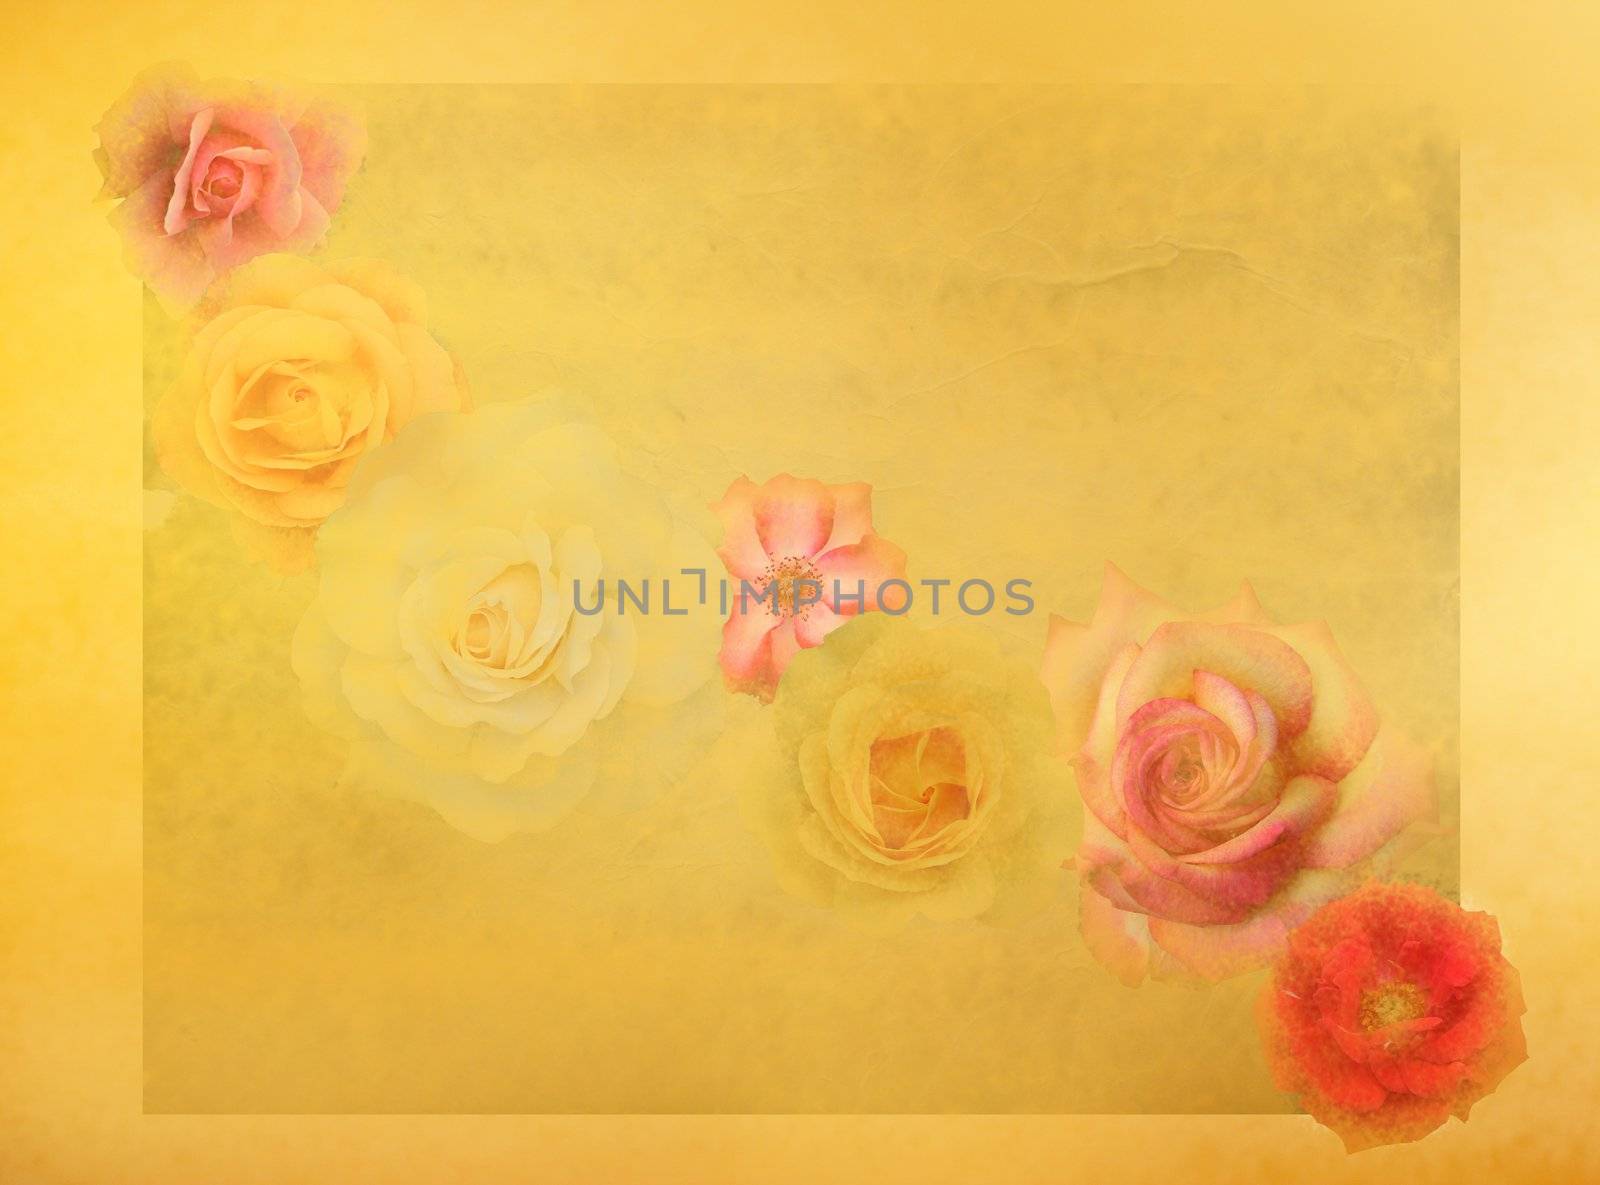 Old fashioned roses on grunge colorful background by jarenwicklund